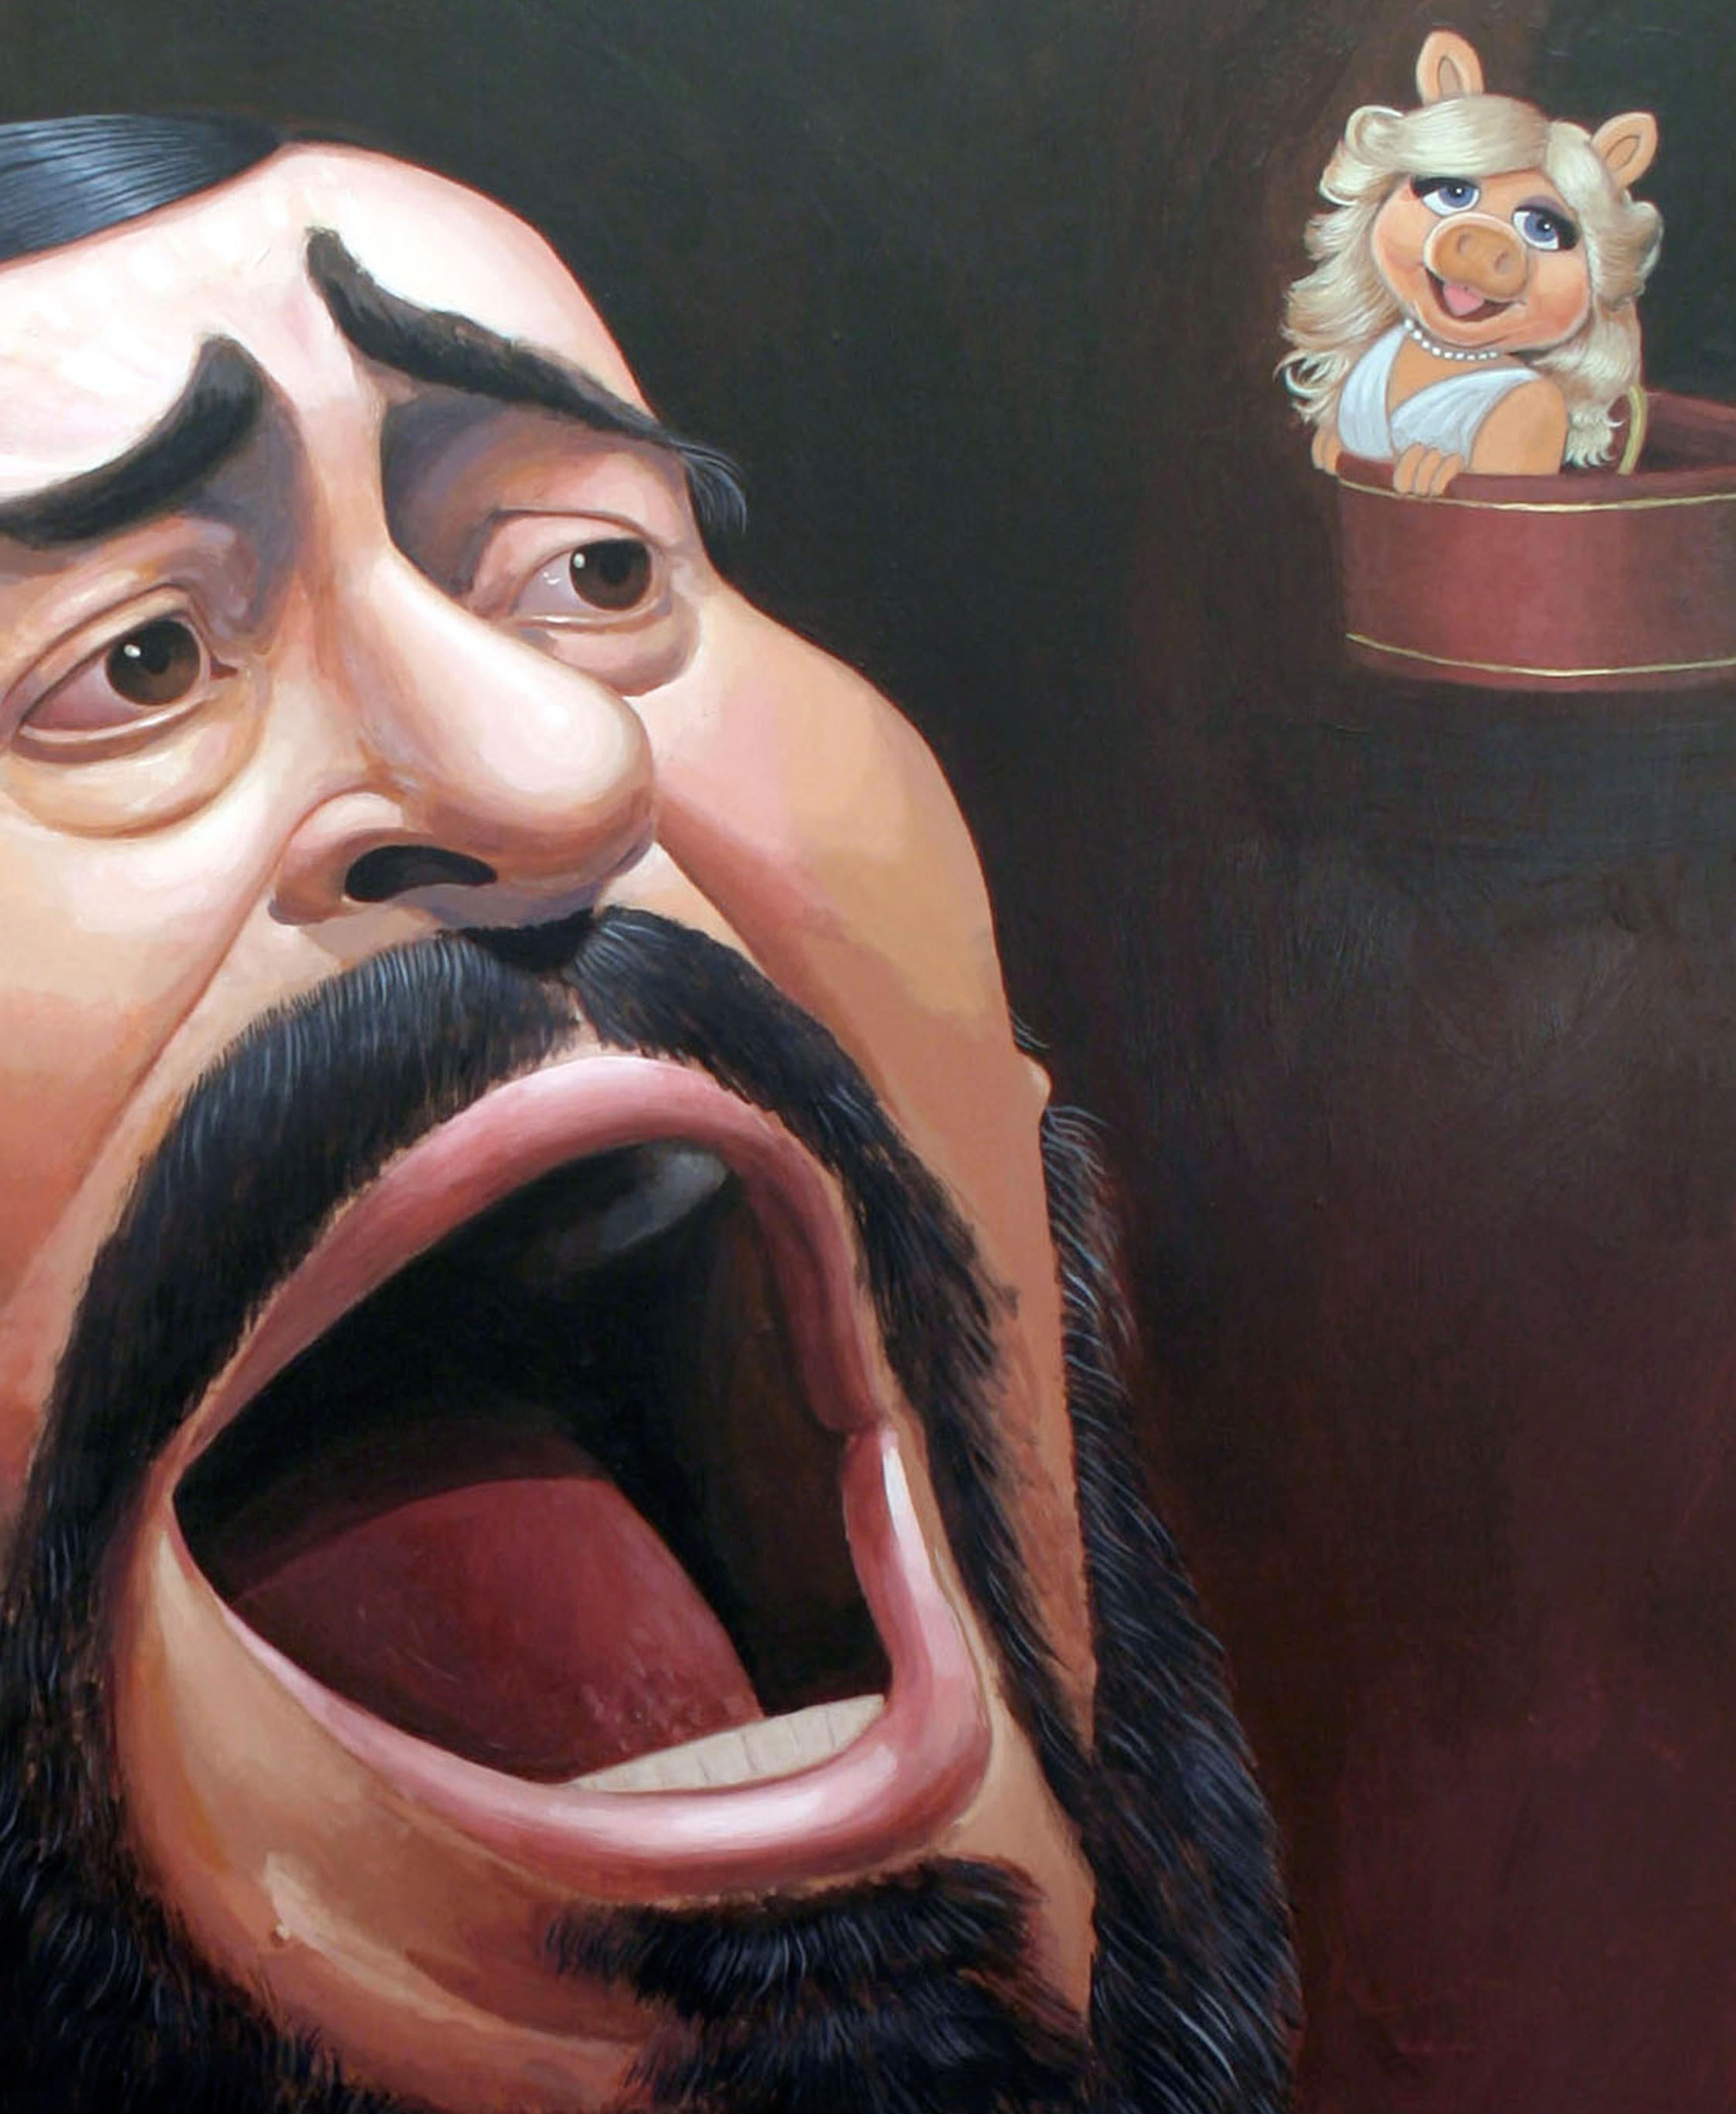 Luciano Pavarotti (Edition of 100) - Wall Art Caricature - Photograph by Dan Springer